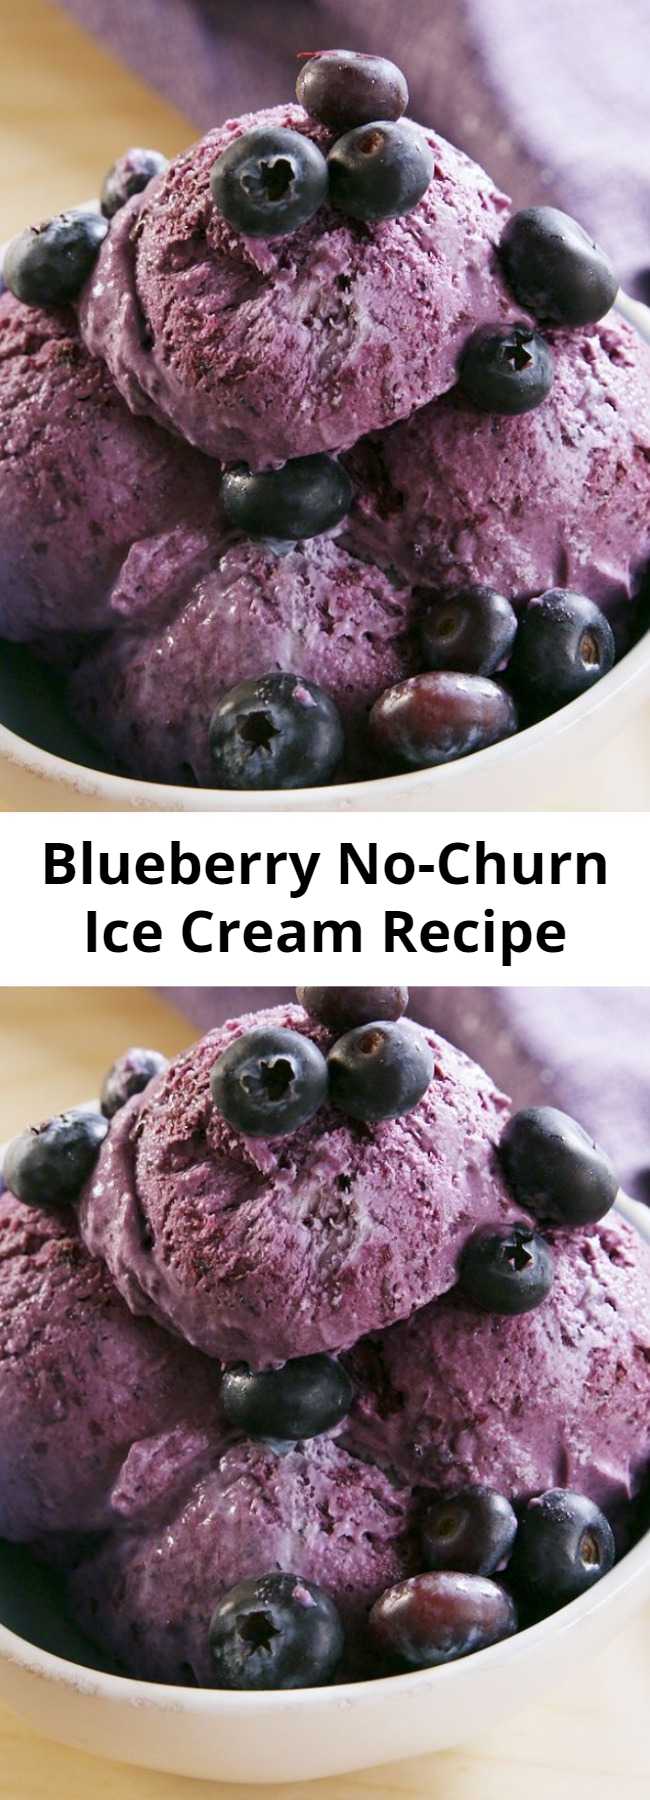 Blueberry No-Churn Ice Cream Recipe - Find homemade ice cream intimidating? Relax! This no-churn recipe couldn't be easier. Bonus: it works with just about every berry! #easyrecipe #recipe #blueberry #icecream #nochurn #homemade